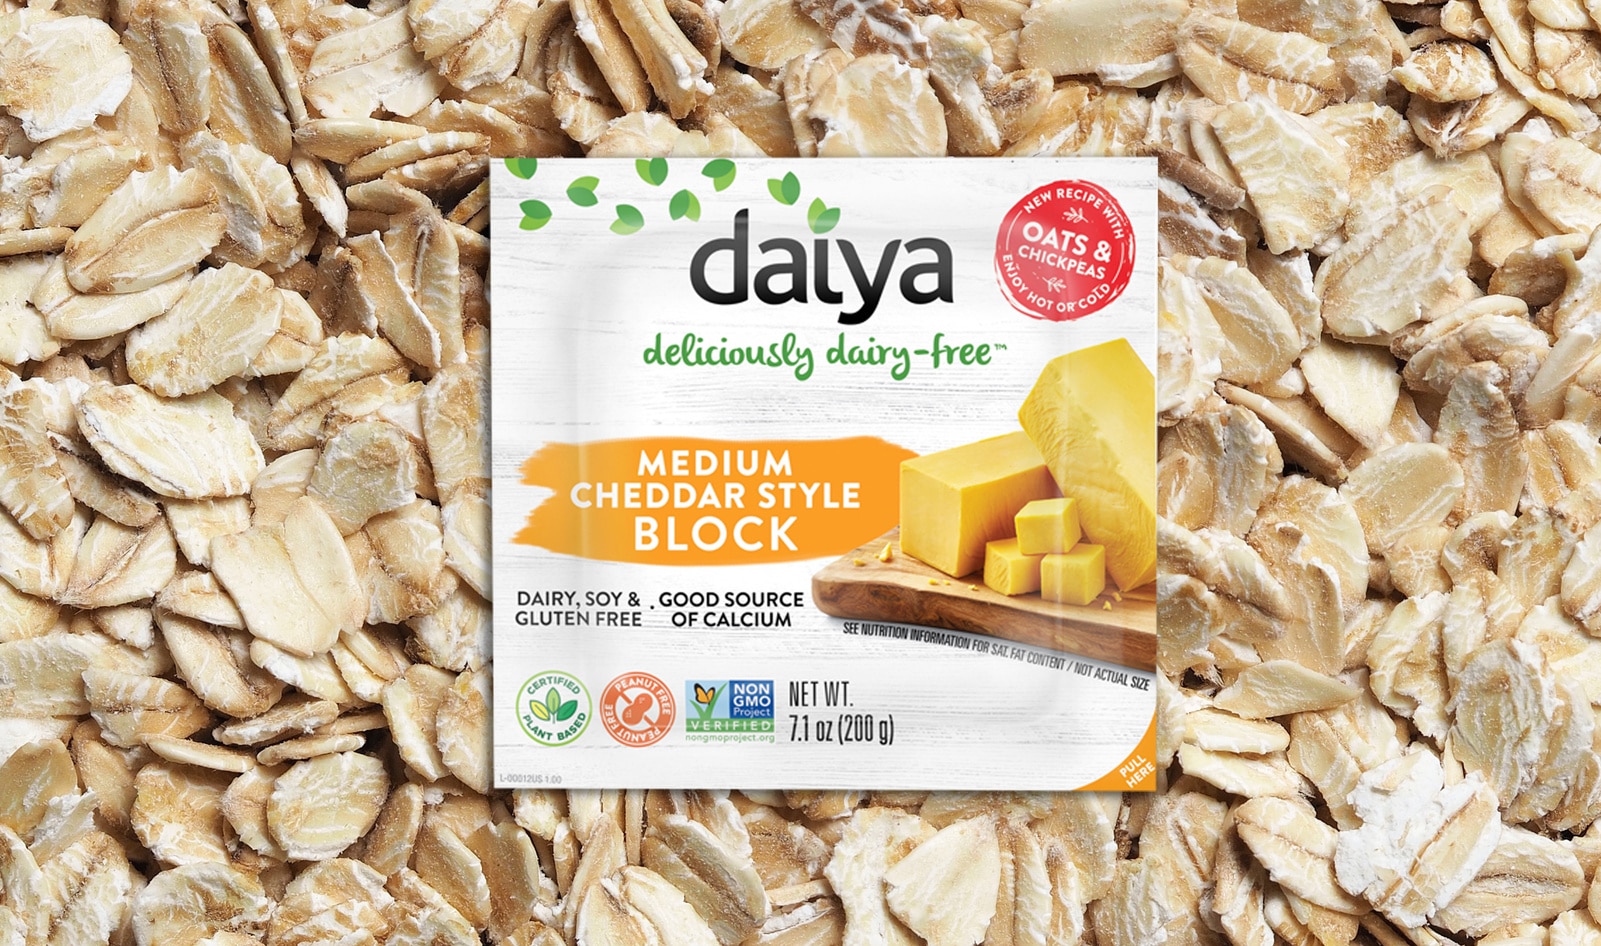 Daiya Improves Vegan Cheese Blocks with Oats and Chickpeas